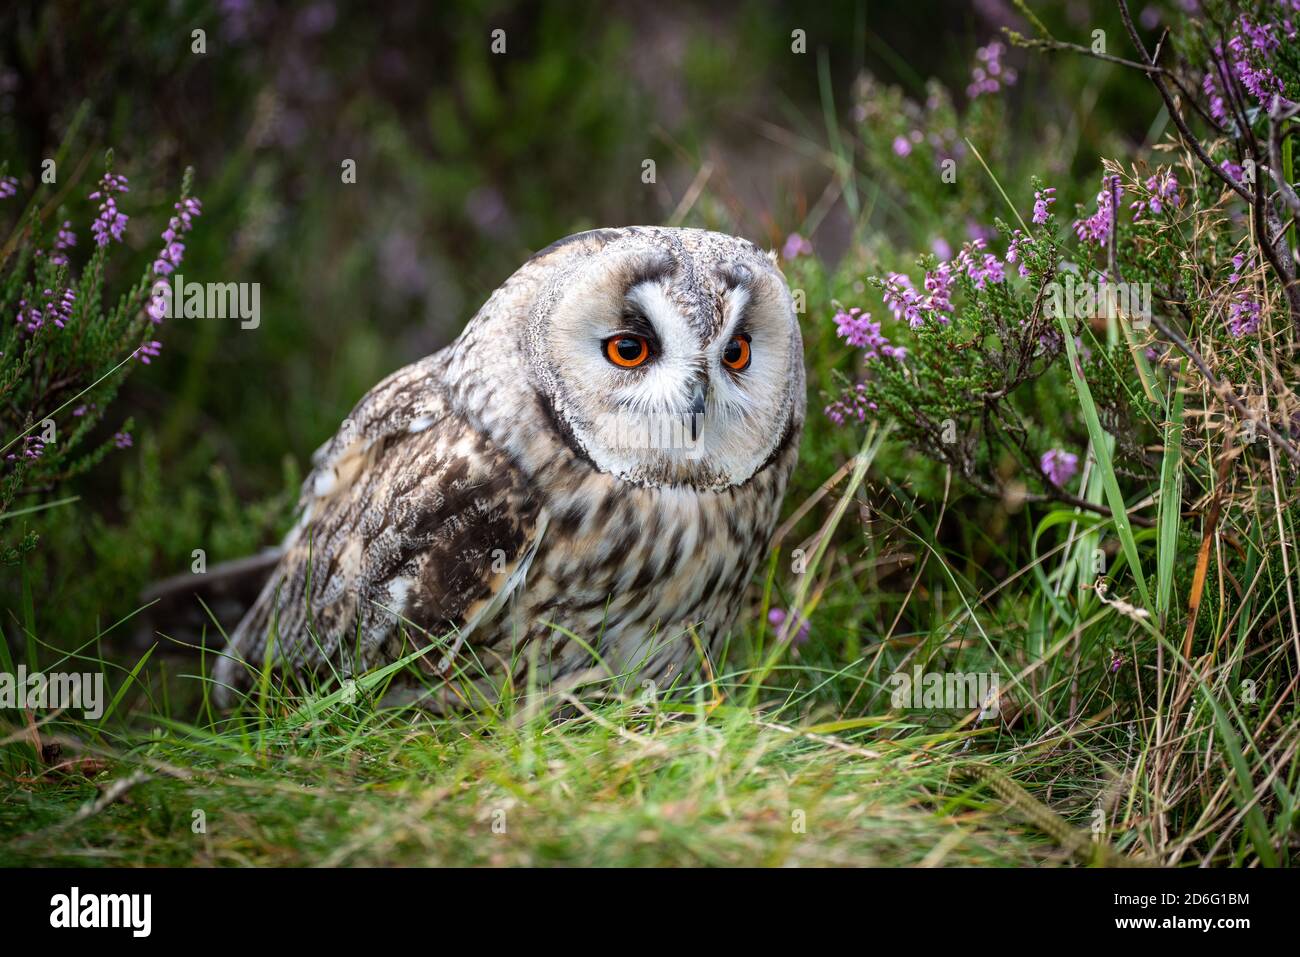 A close up of a long eared owl hiding in the heather. it appears to be crouching down and looks alert with large orange eyes Stock Photo